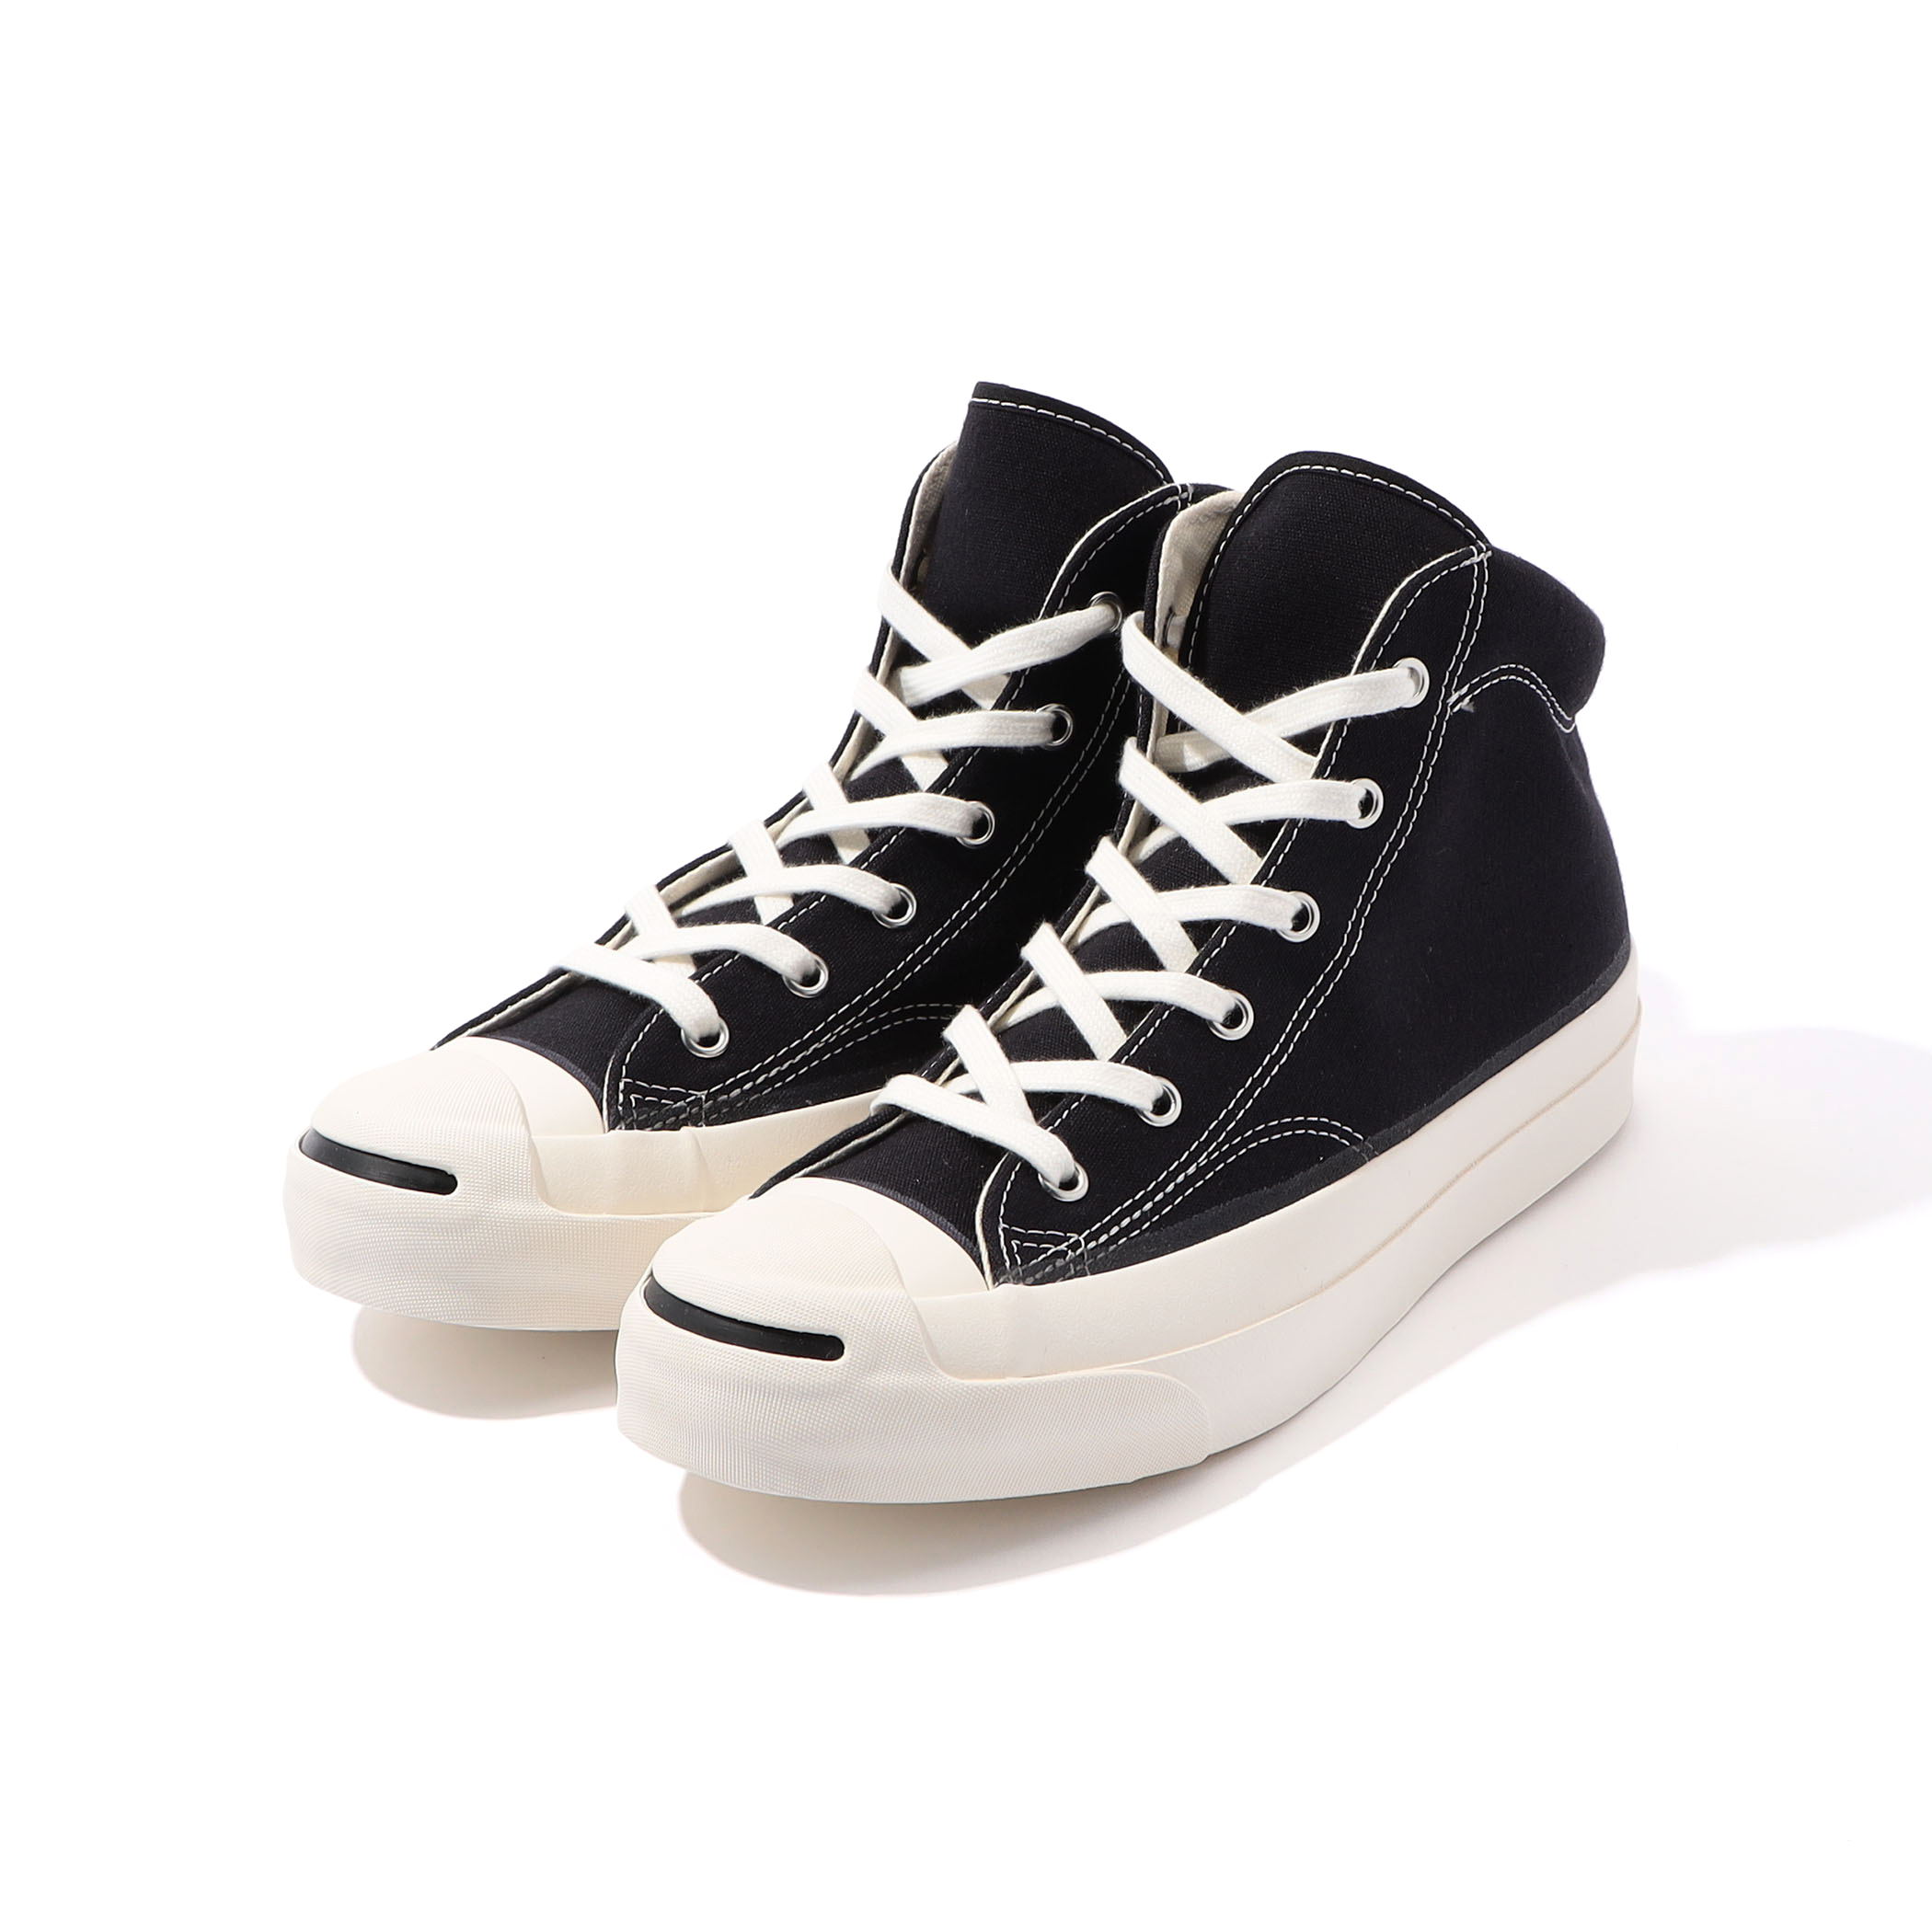 CONVERSE Addict JACK PURCELL